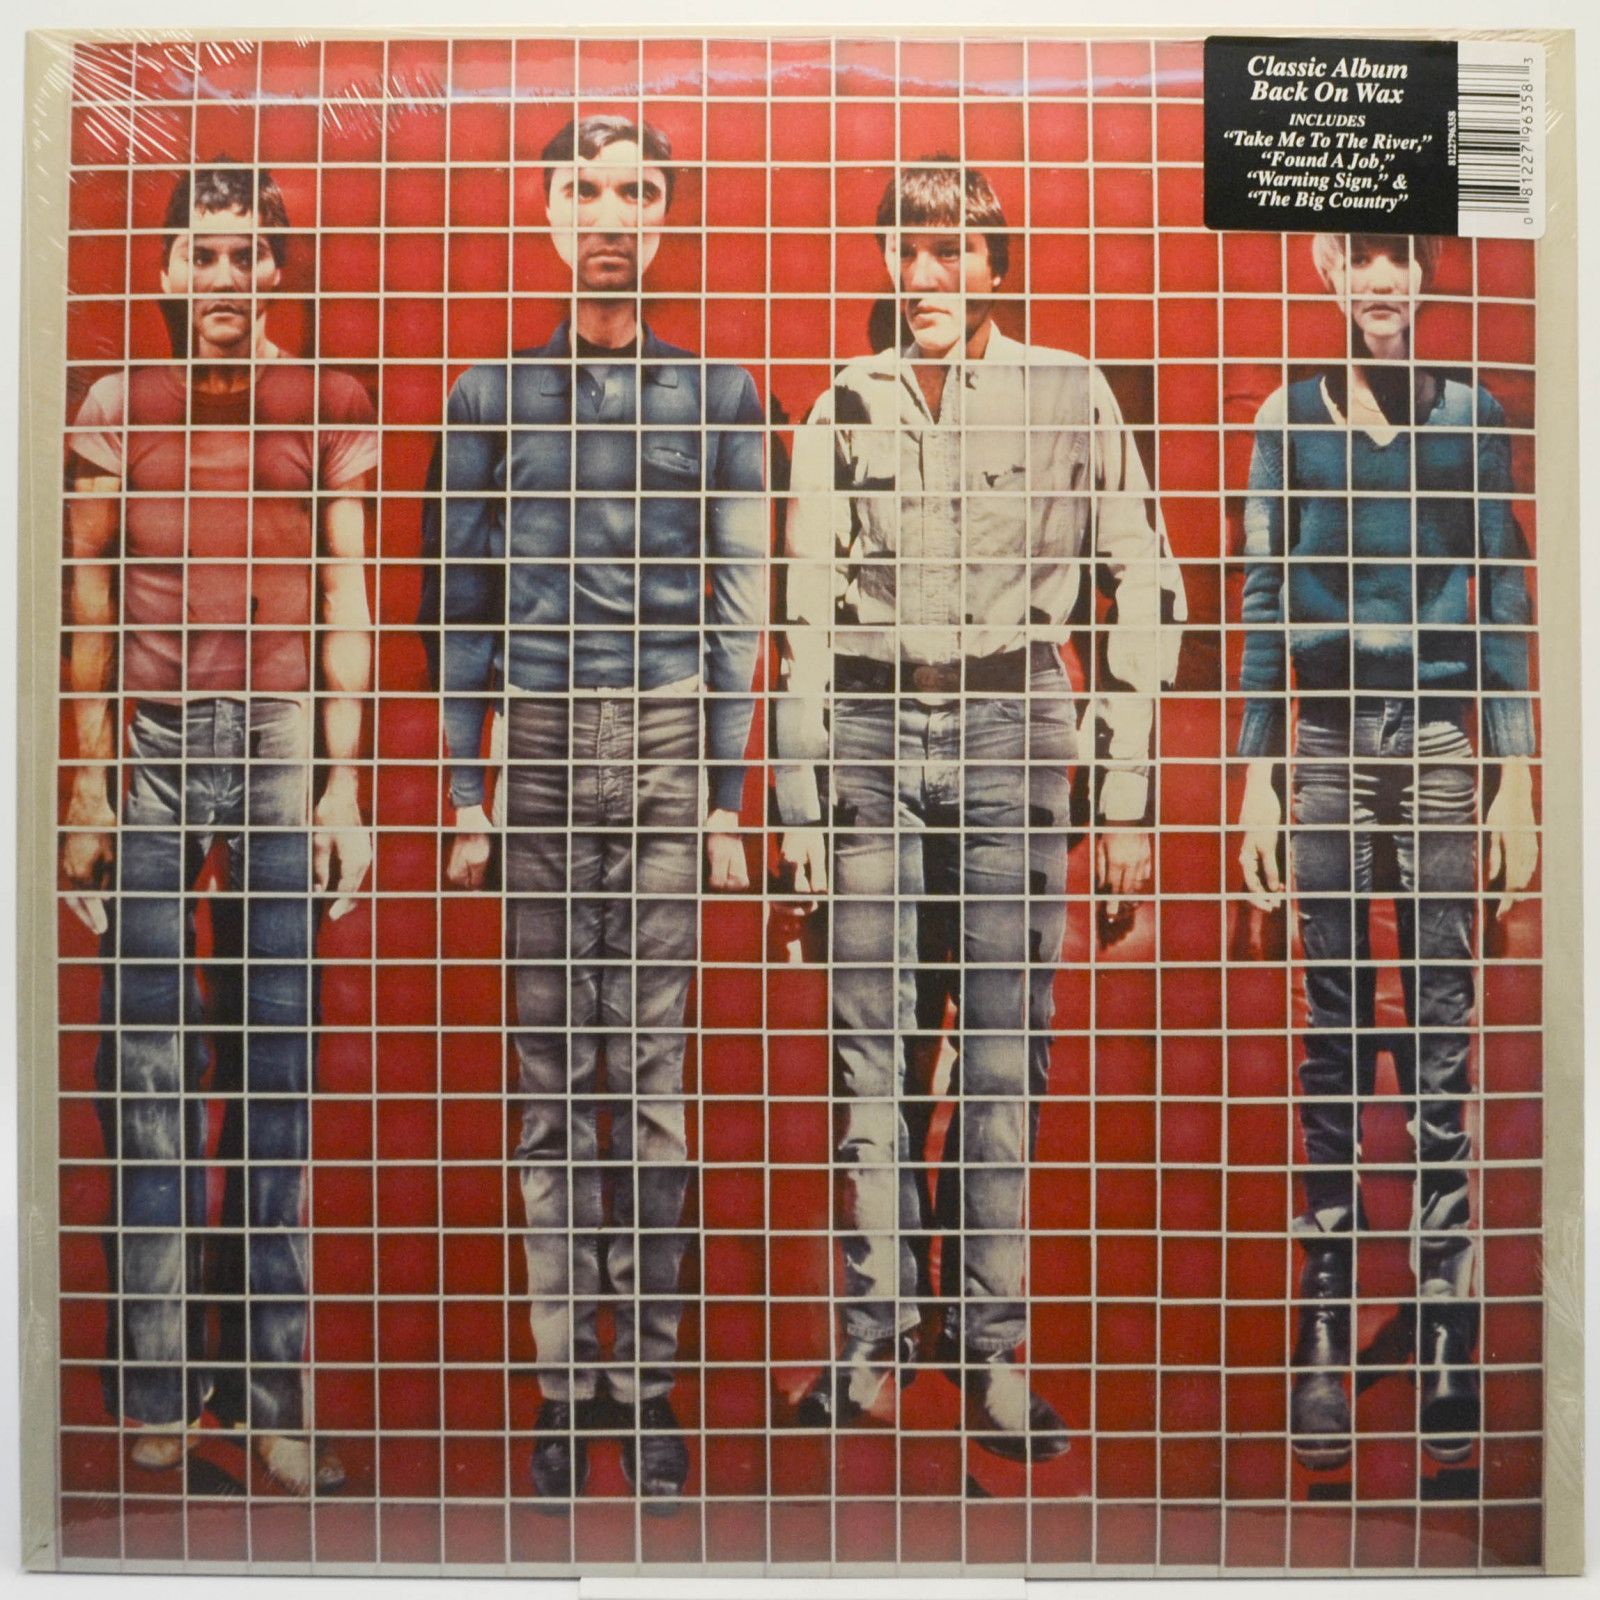 Talking Heads — More Songs About Buildings And Food, 1978